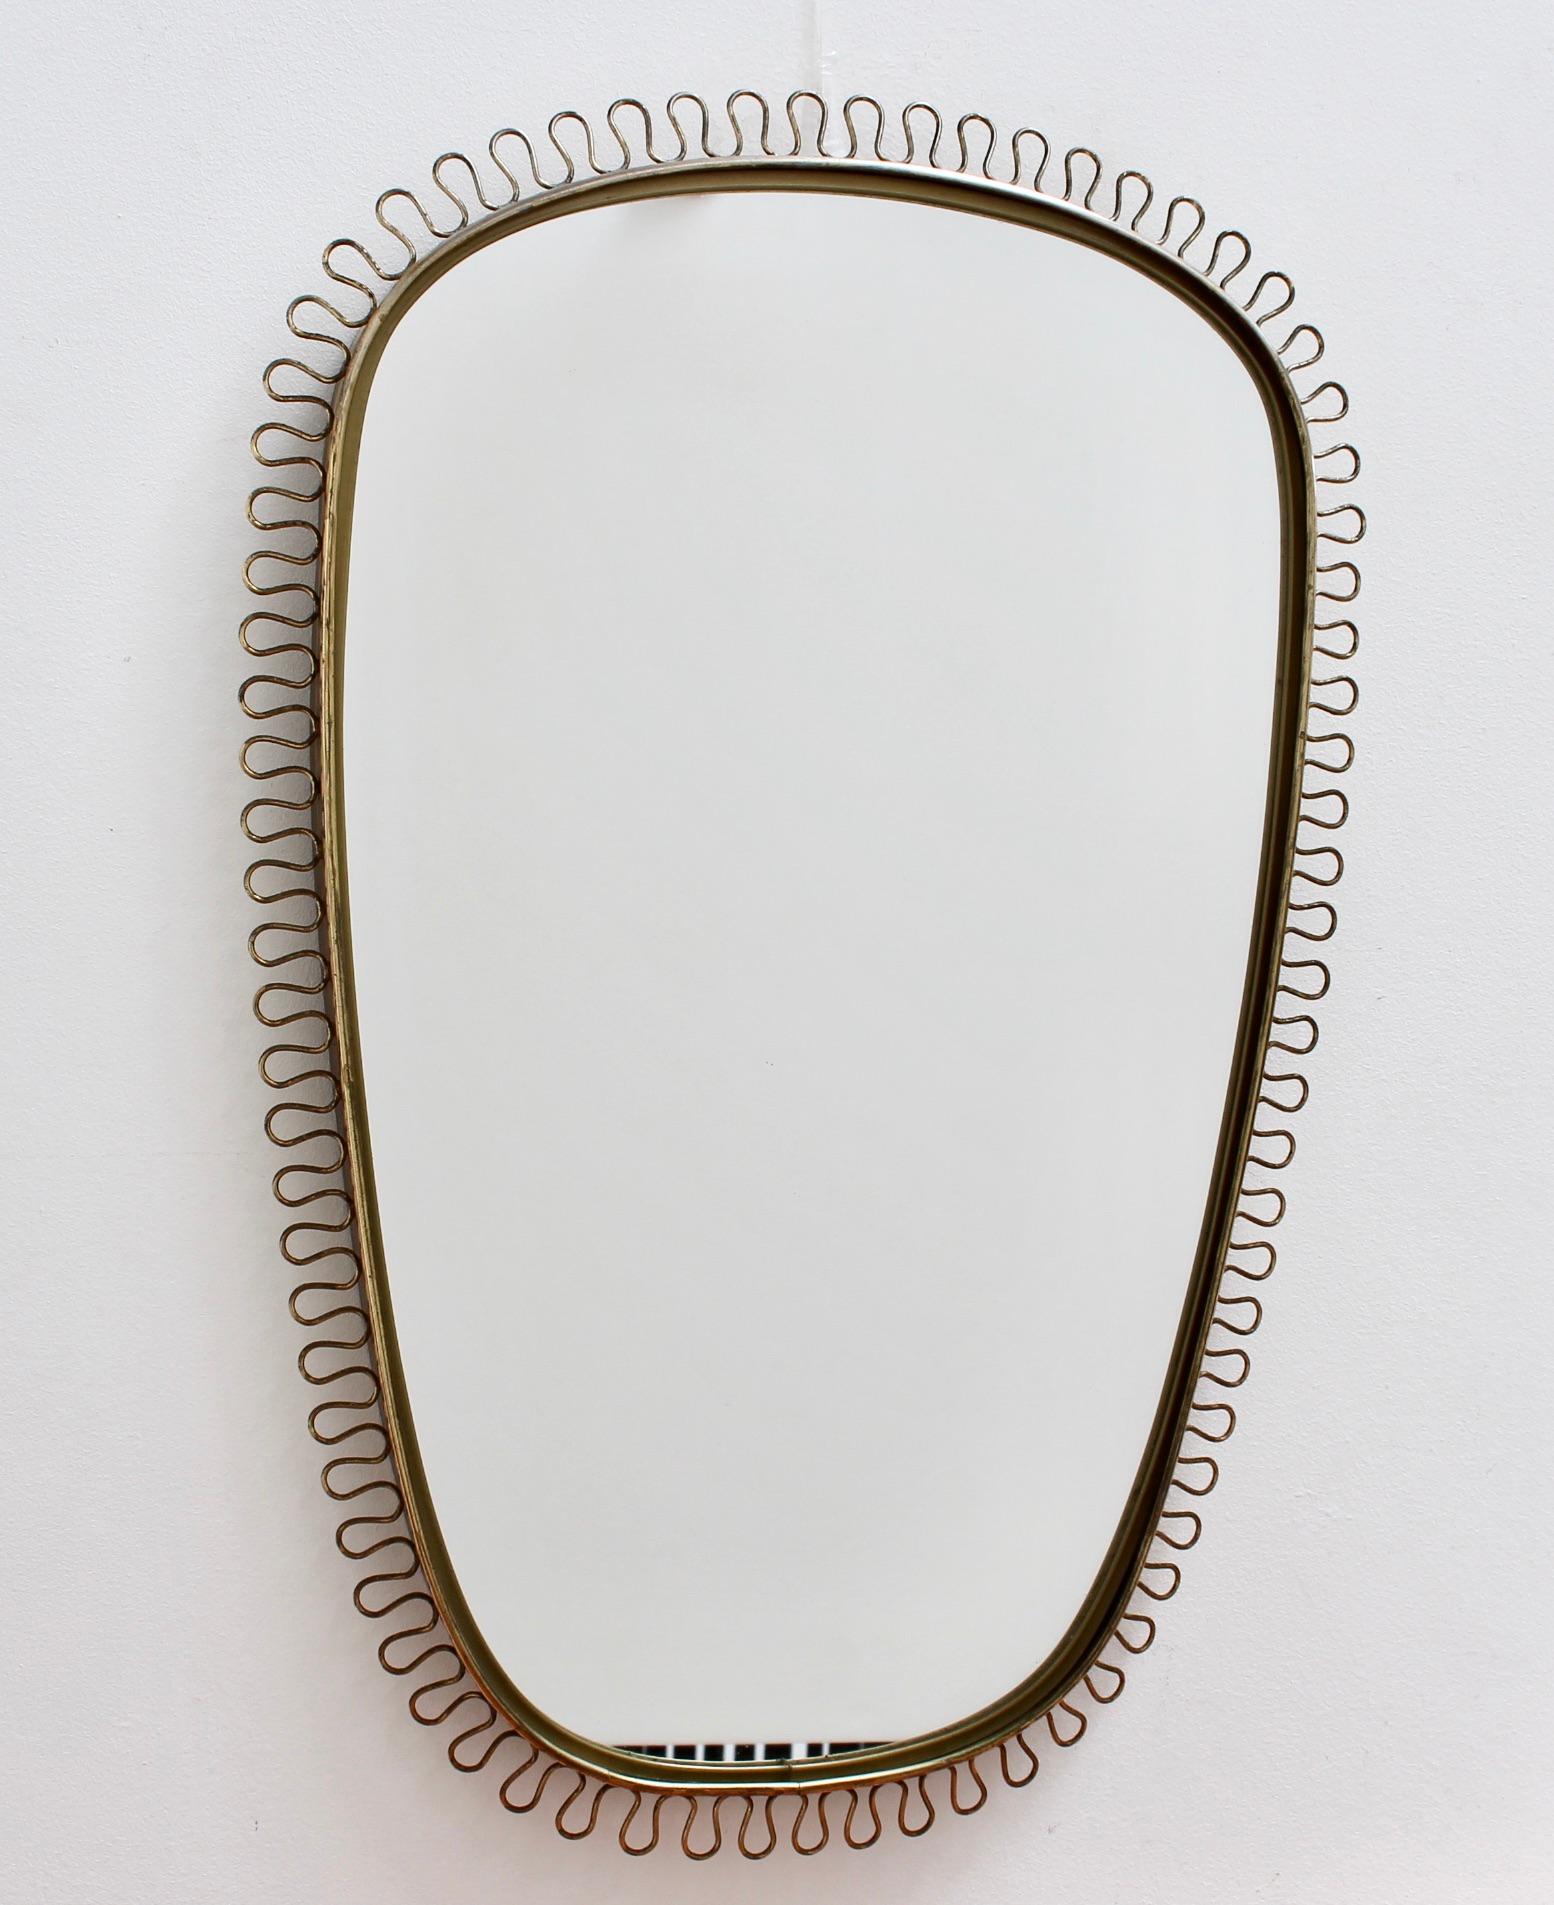 Brass wall mirror with decorative corona-effect surround by Josef Frank (circa 1950s). Original design, elegant presence and confident shape, this mirror is the centre of attention in any room. A characterful patina on the frame with dark patches